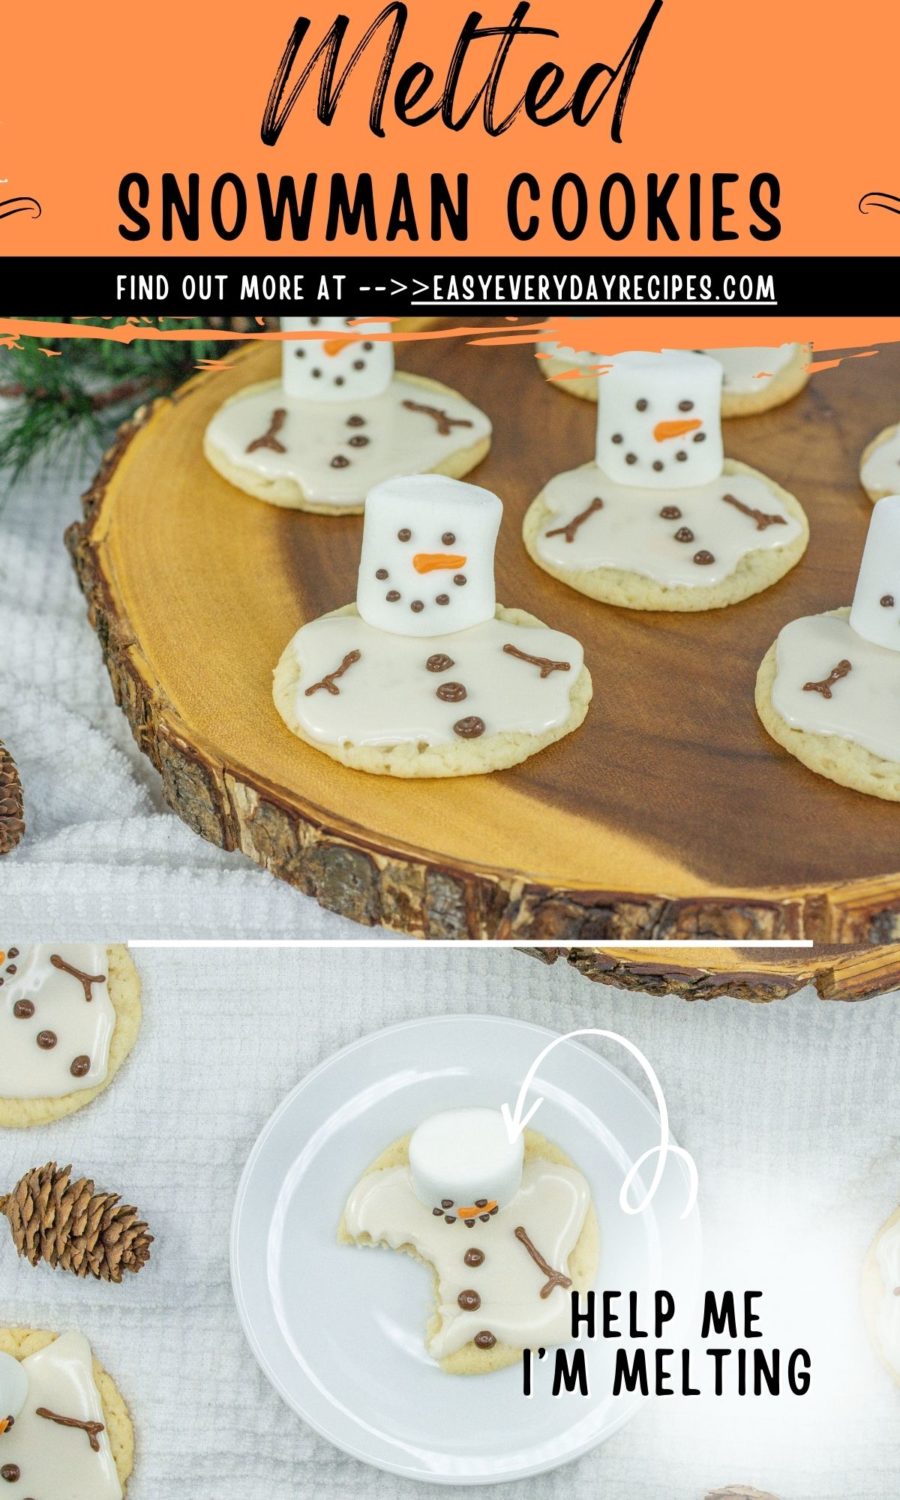 Melted snowman cookies with the text help me melting.